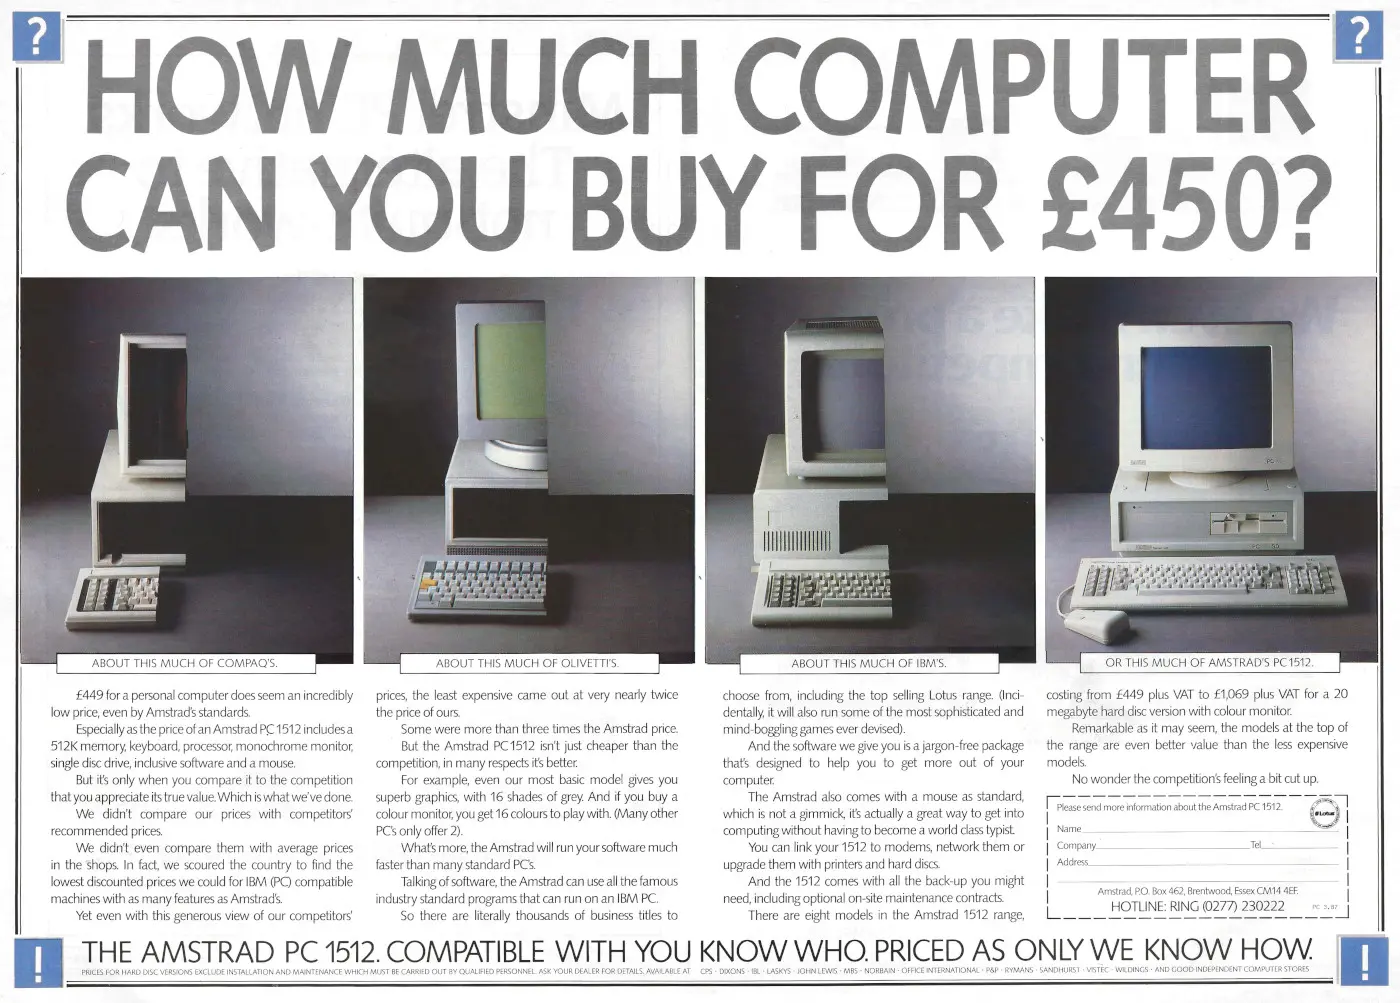 Amstrad Advert: How much computer can you buy for £450?, from Practical Computing, March 1987